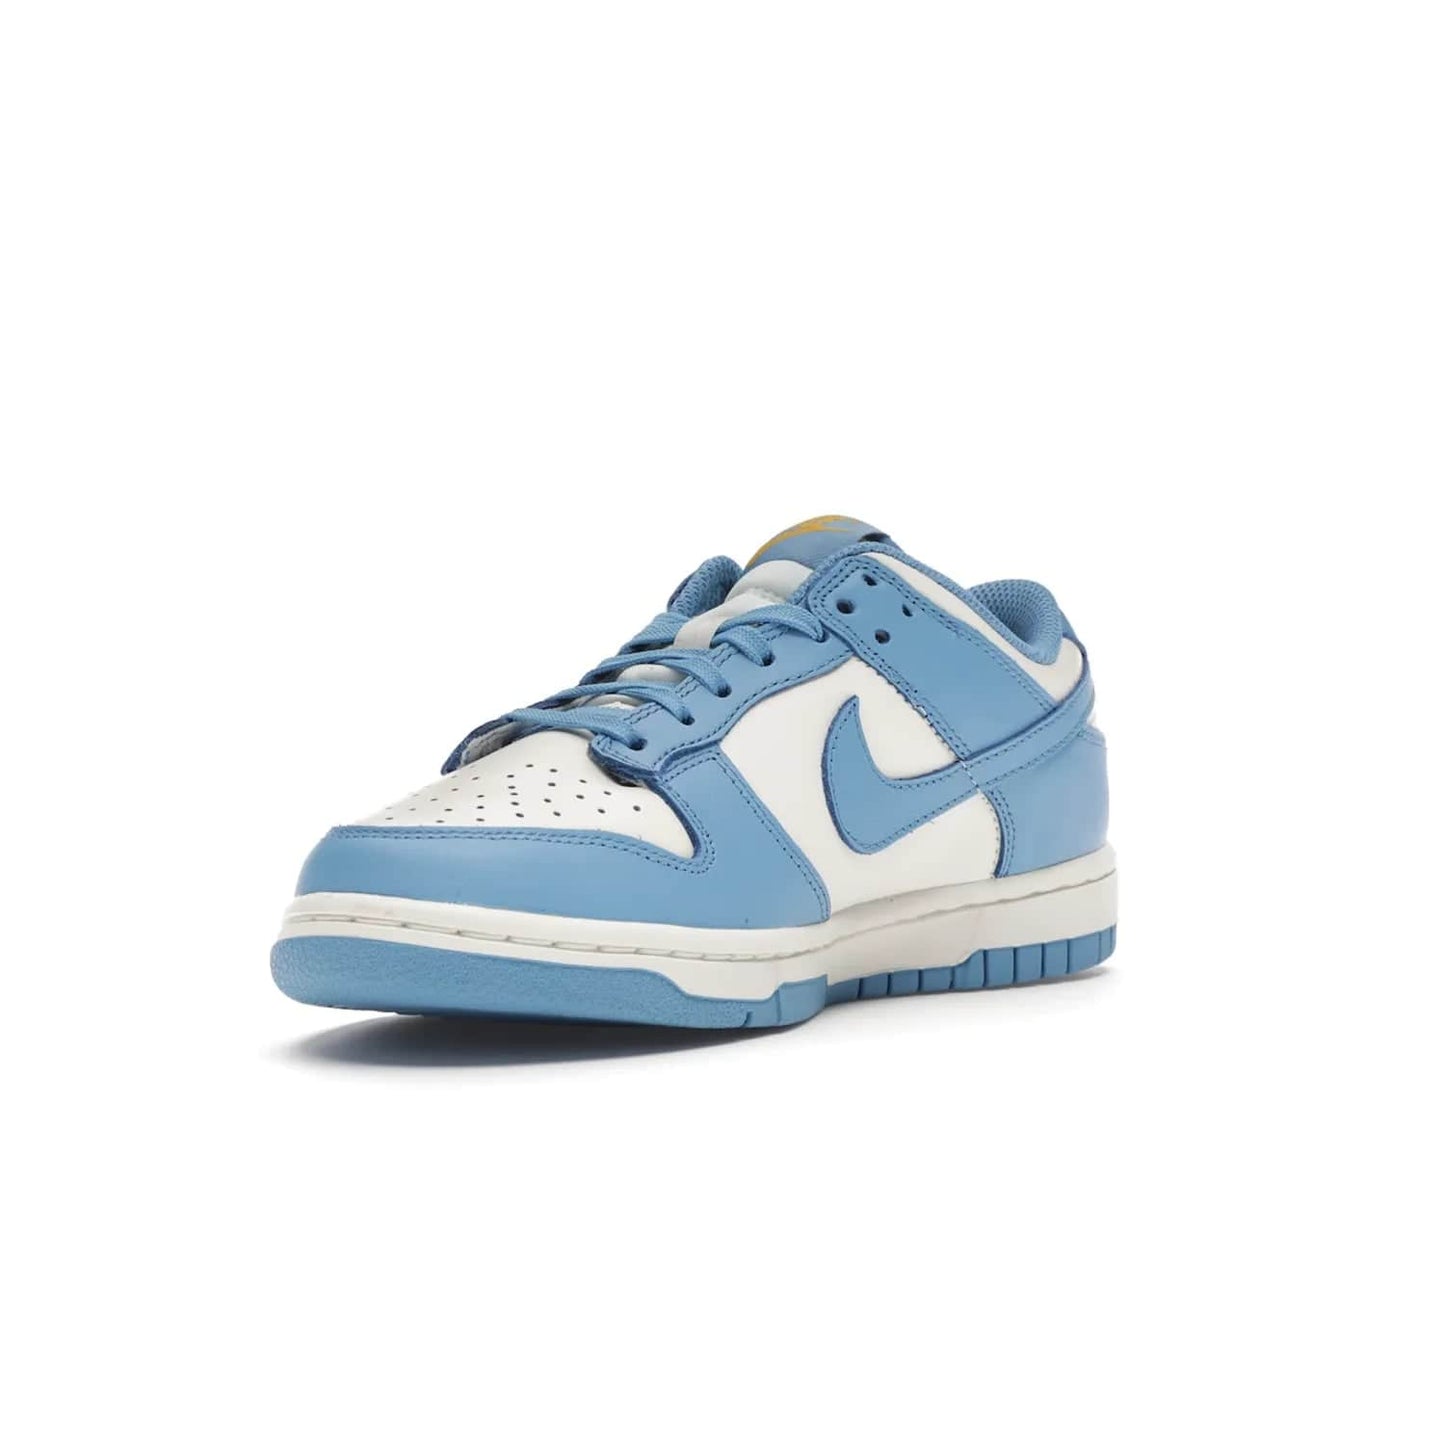 Nike Dunk Low Coast (Women's) - Image 14 - Only at www.BallersClubKickz.com - Iconic UCLA colors honor the west coast with the Nike Dunk Low Coast (Women's), a bold combo of light blue, white and yellow. Light leather upper with white midsole and light EVA outsole offer a modern twist. Released Feb 2021 for $100.